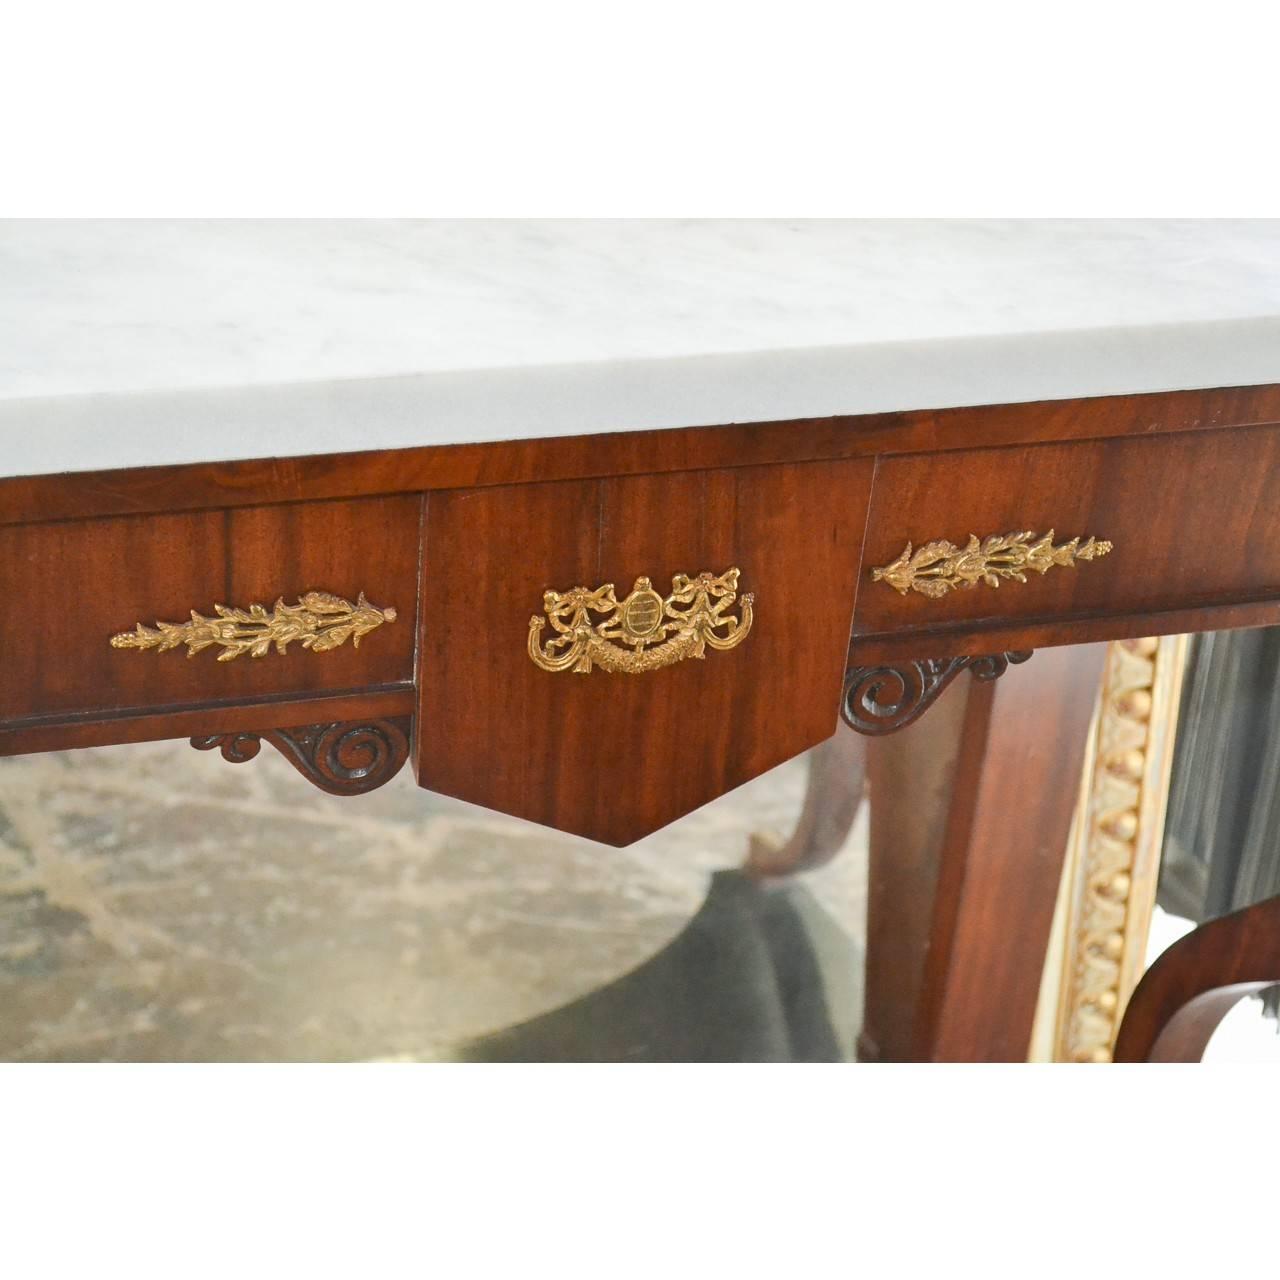 Superbly crafted circa 1900 Continental console table with a fine white Carrara marble top above a shaped frieze with superbly detailed bronze appliques and raised on curved legs and ebonized lower tier.

 